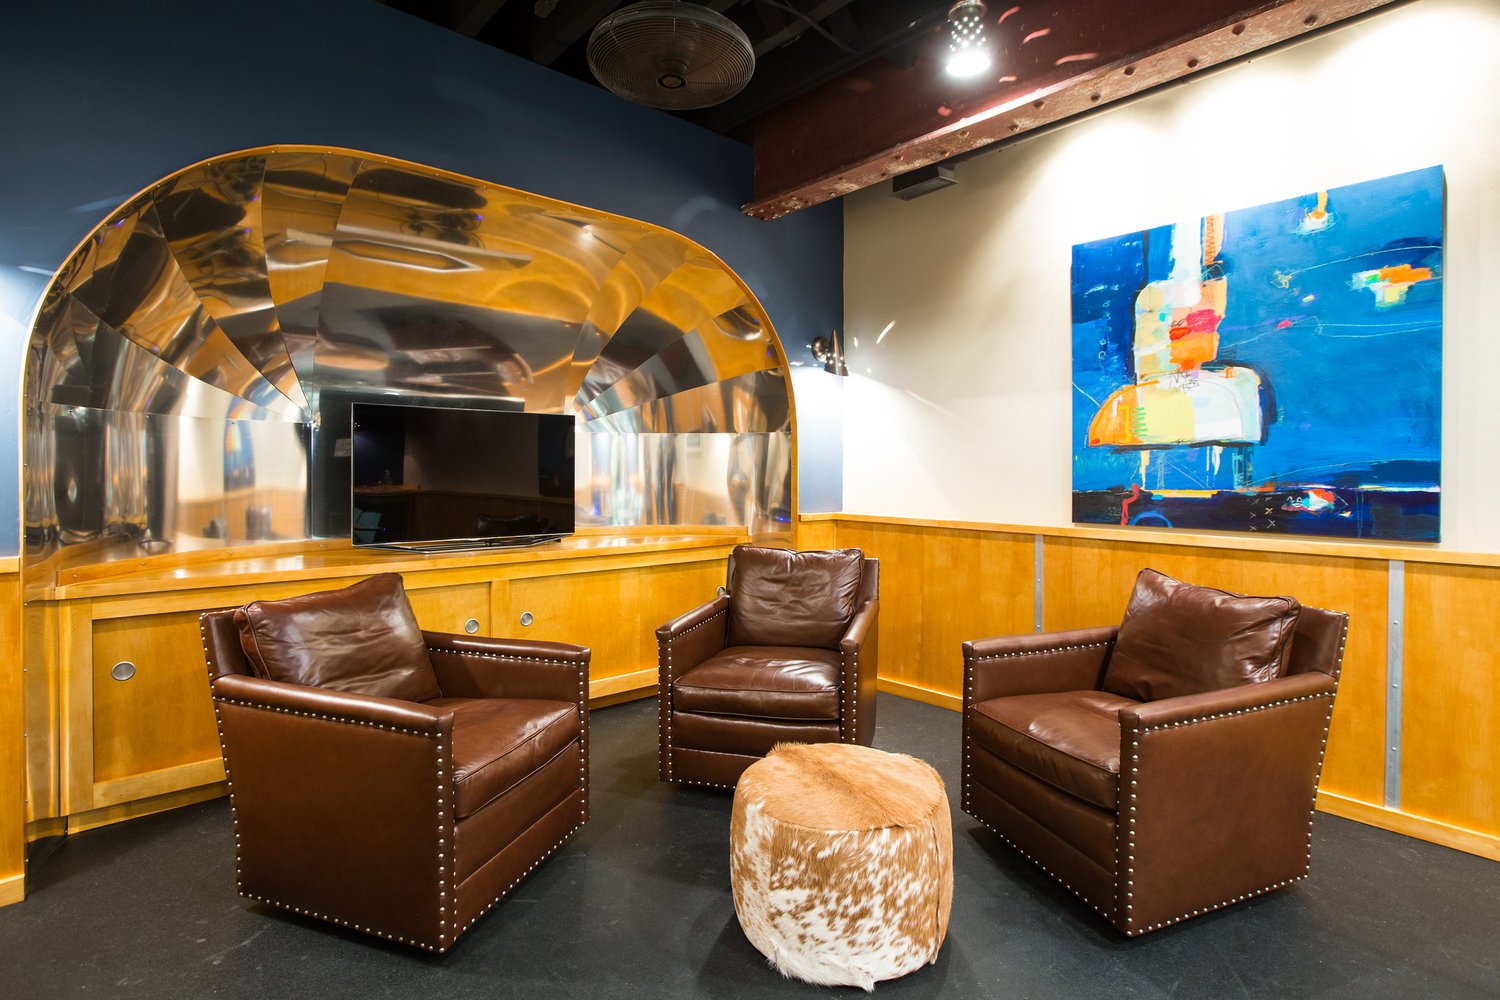 Glen Ellyn conference room design inspired by an airstream. Design by Two Hands interiors.